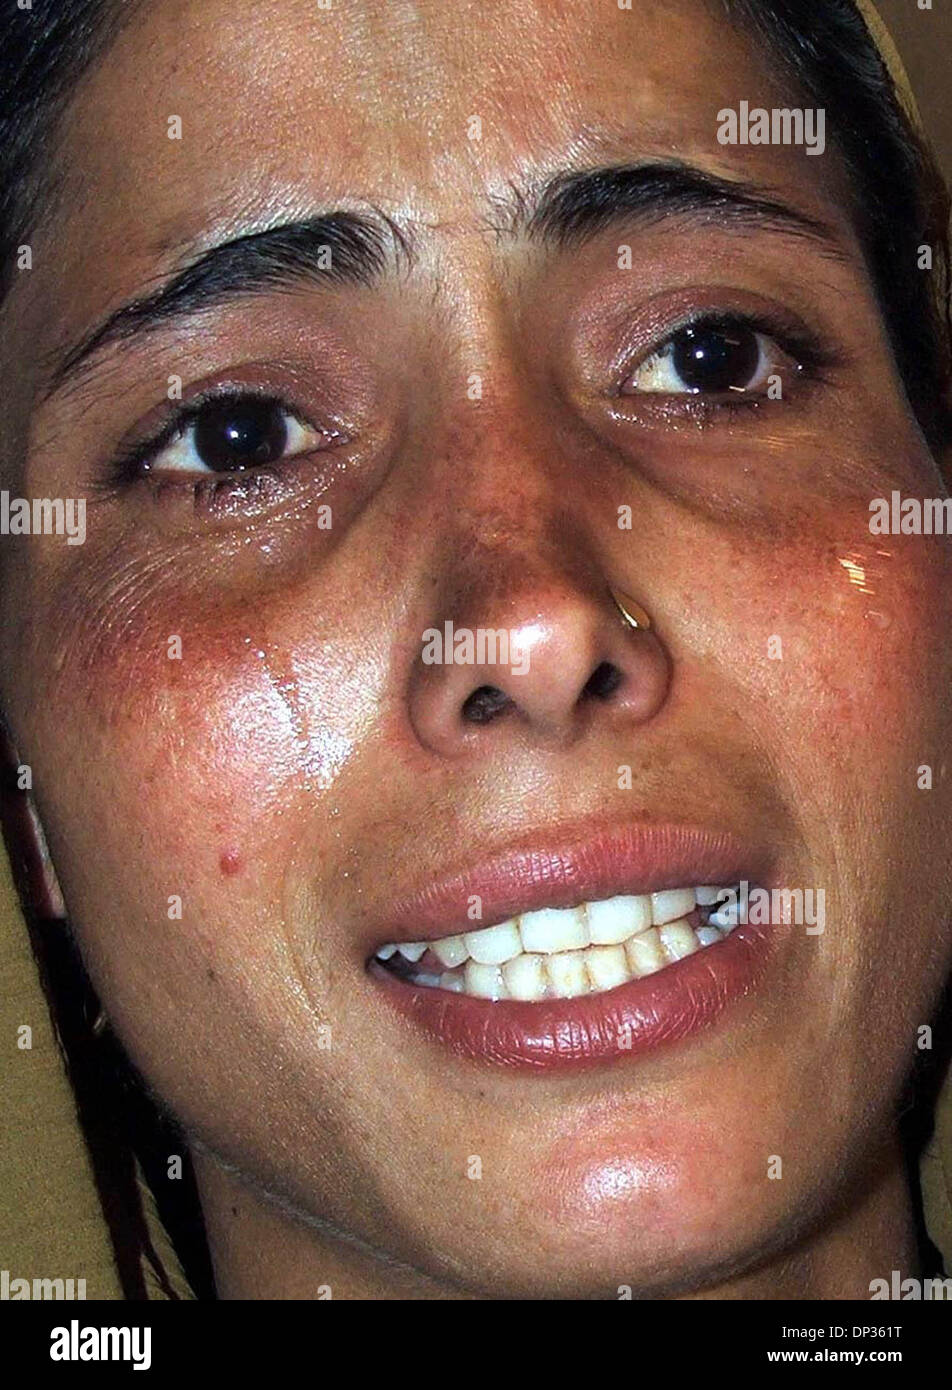 Jun 22, 2006; Spore, Kashmir, INDIA; Relatives of Muslim devotees who were wounded in a grenade explosion cry at a hospital in Srinagar, India, Thursday, June 22, 2006. A hand grenade exploded Thursday during a sermon by a well-known Islamic religious leader addressing dozens of Muslim followers at his home in Sopore, a town 50 kilometers (30 miles) north of Srinagar, in Indian-adm Stock Photo